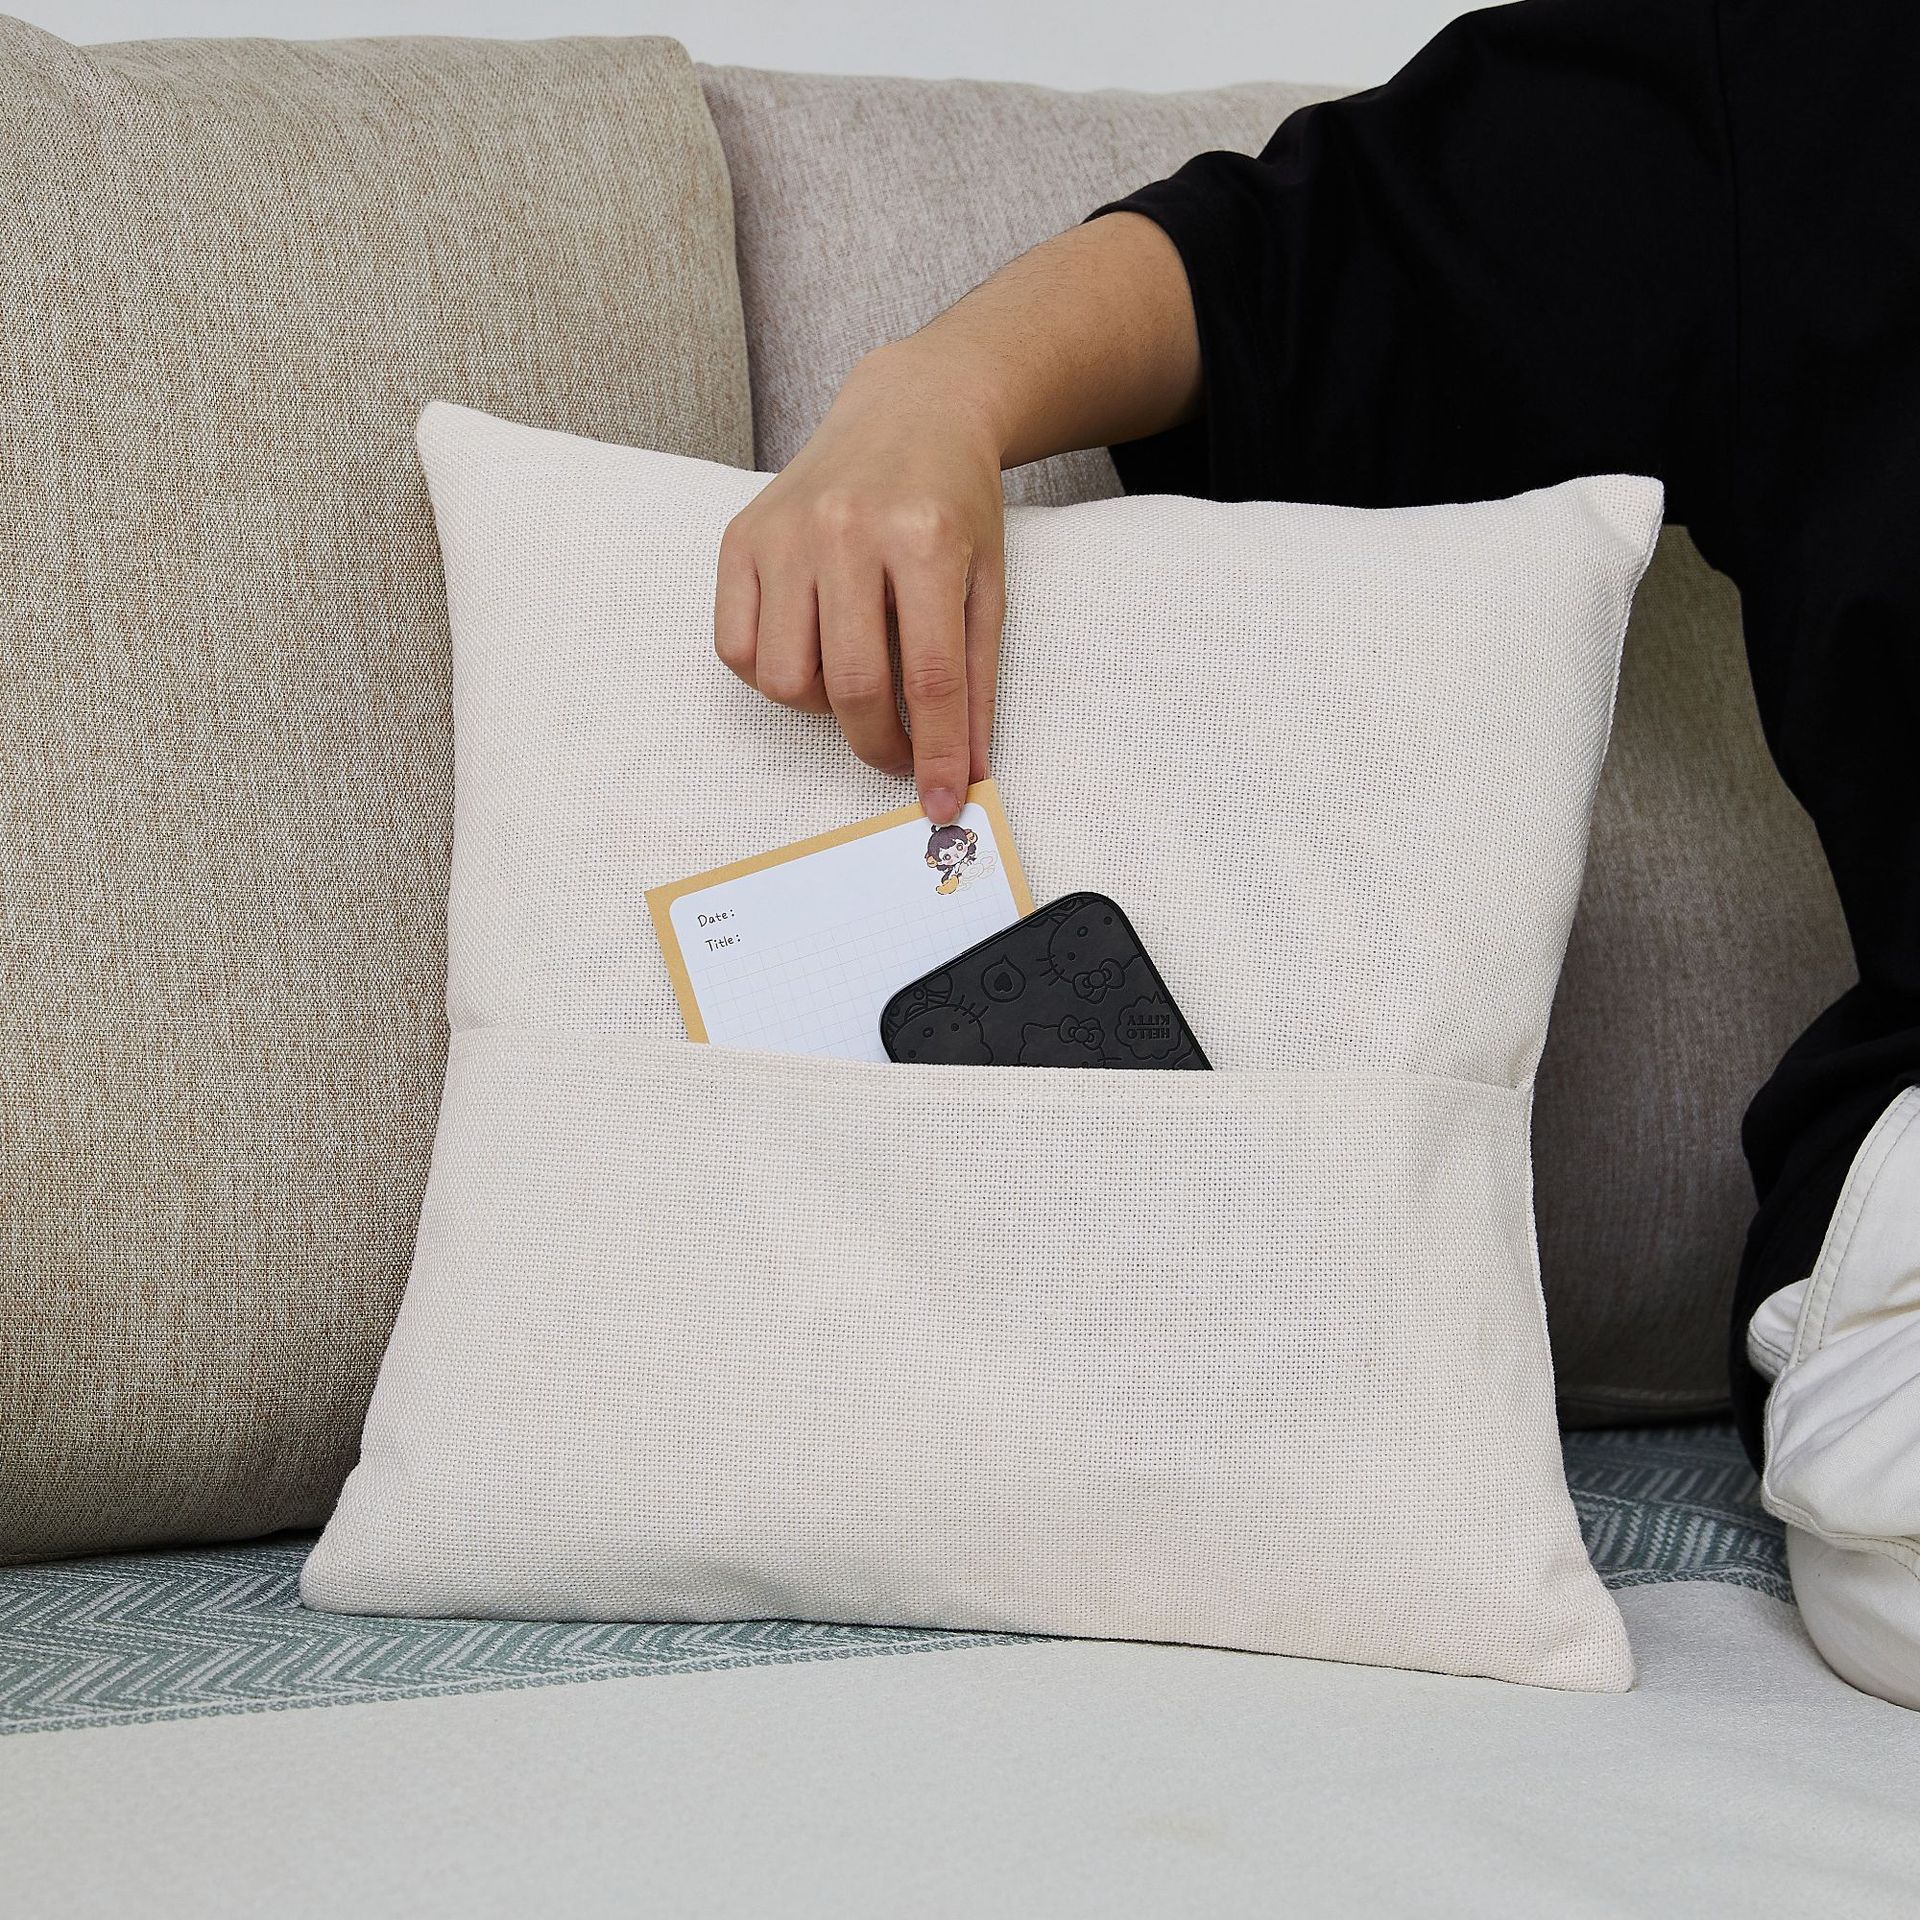 Blank Material Thermal Transfer Printing 300G Cotton and Linen Cushion Case with Pocket Home Decoration Sofa Cushion Lumbar Support Pillow